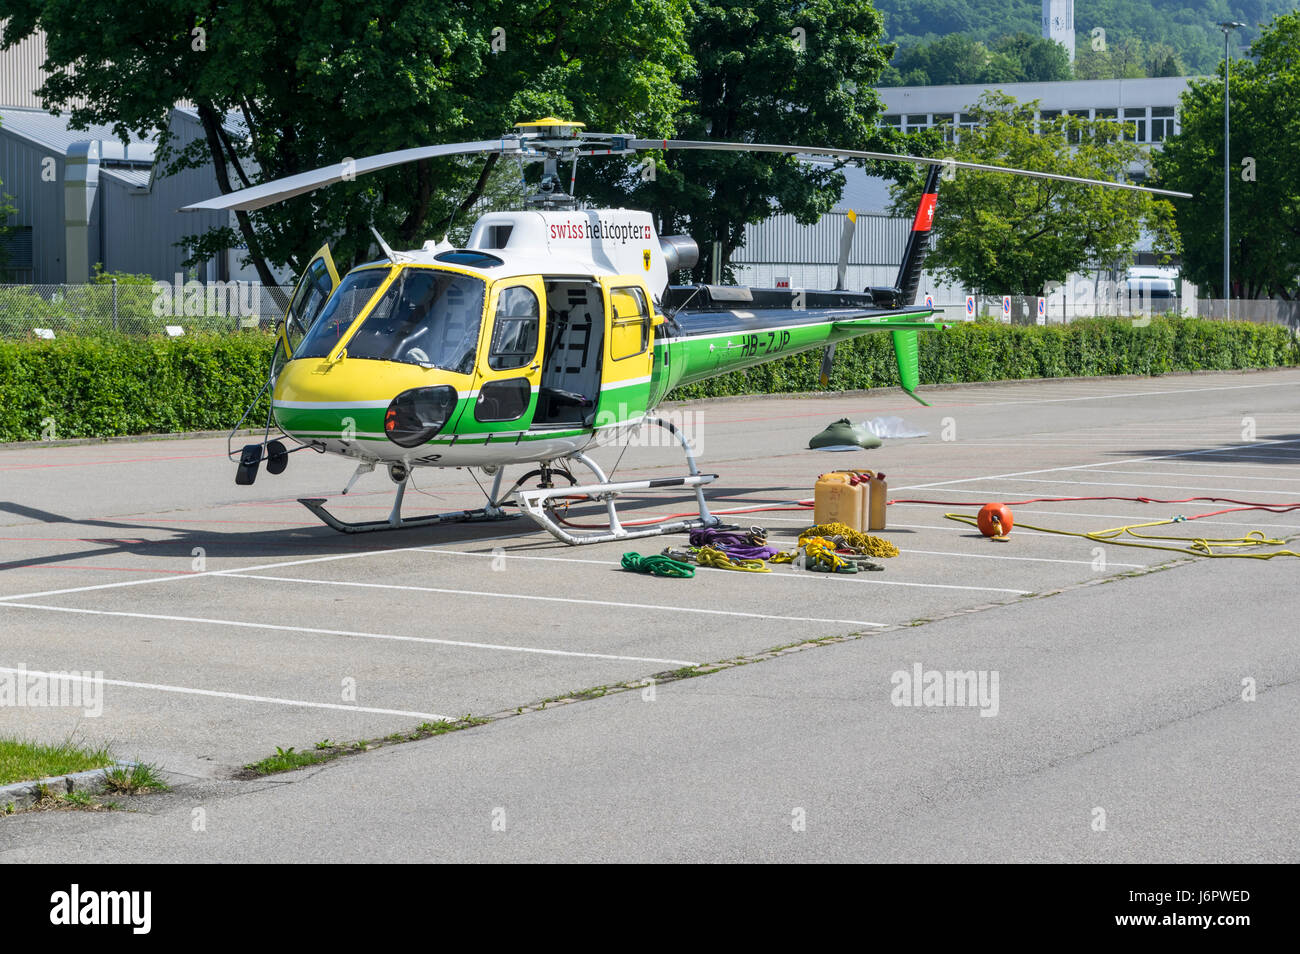 Aérospatiale/Eurocopter AS350 B3 'Écureuil' (Airbus Helicopters H125) landed on a parking lot, ready for cargo transport. Swiss Helicopter AG livery. Stock Photo